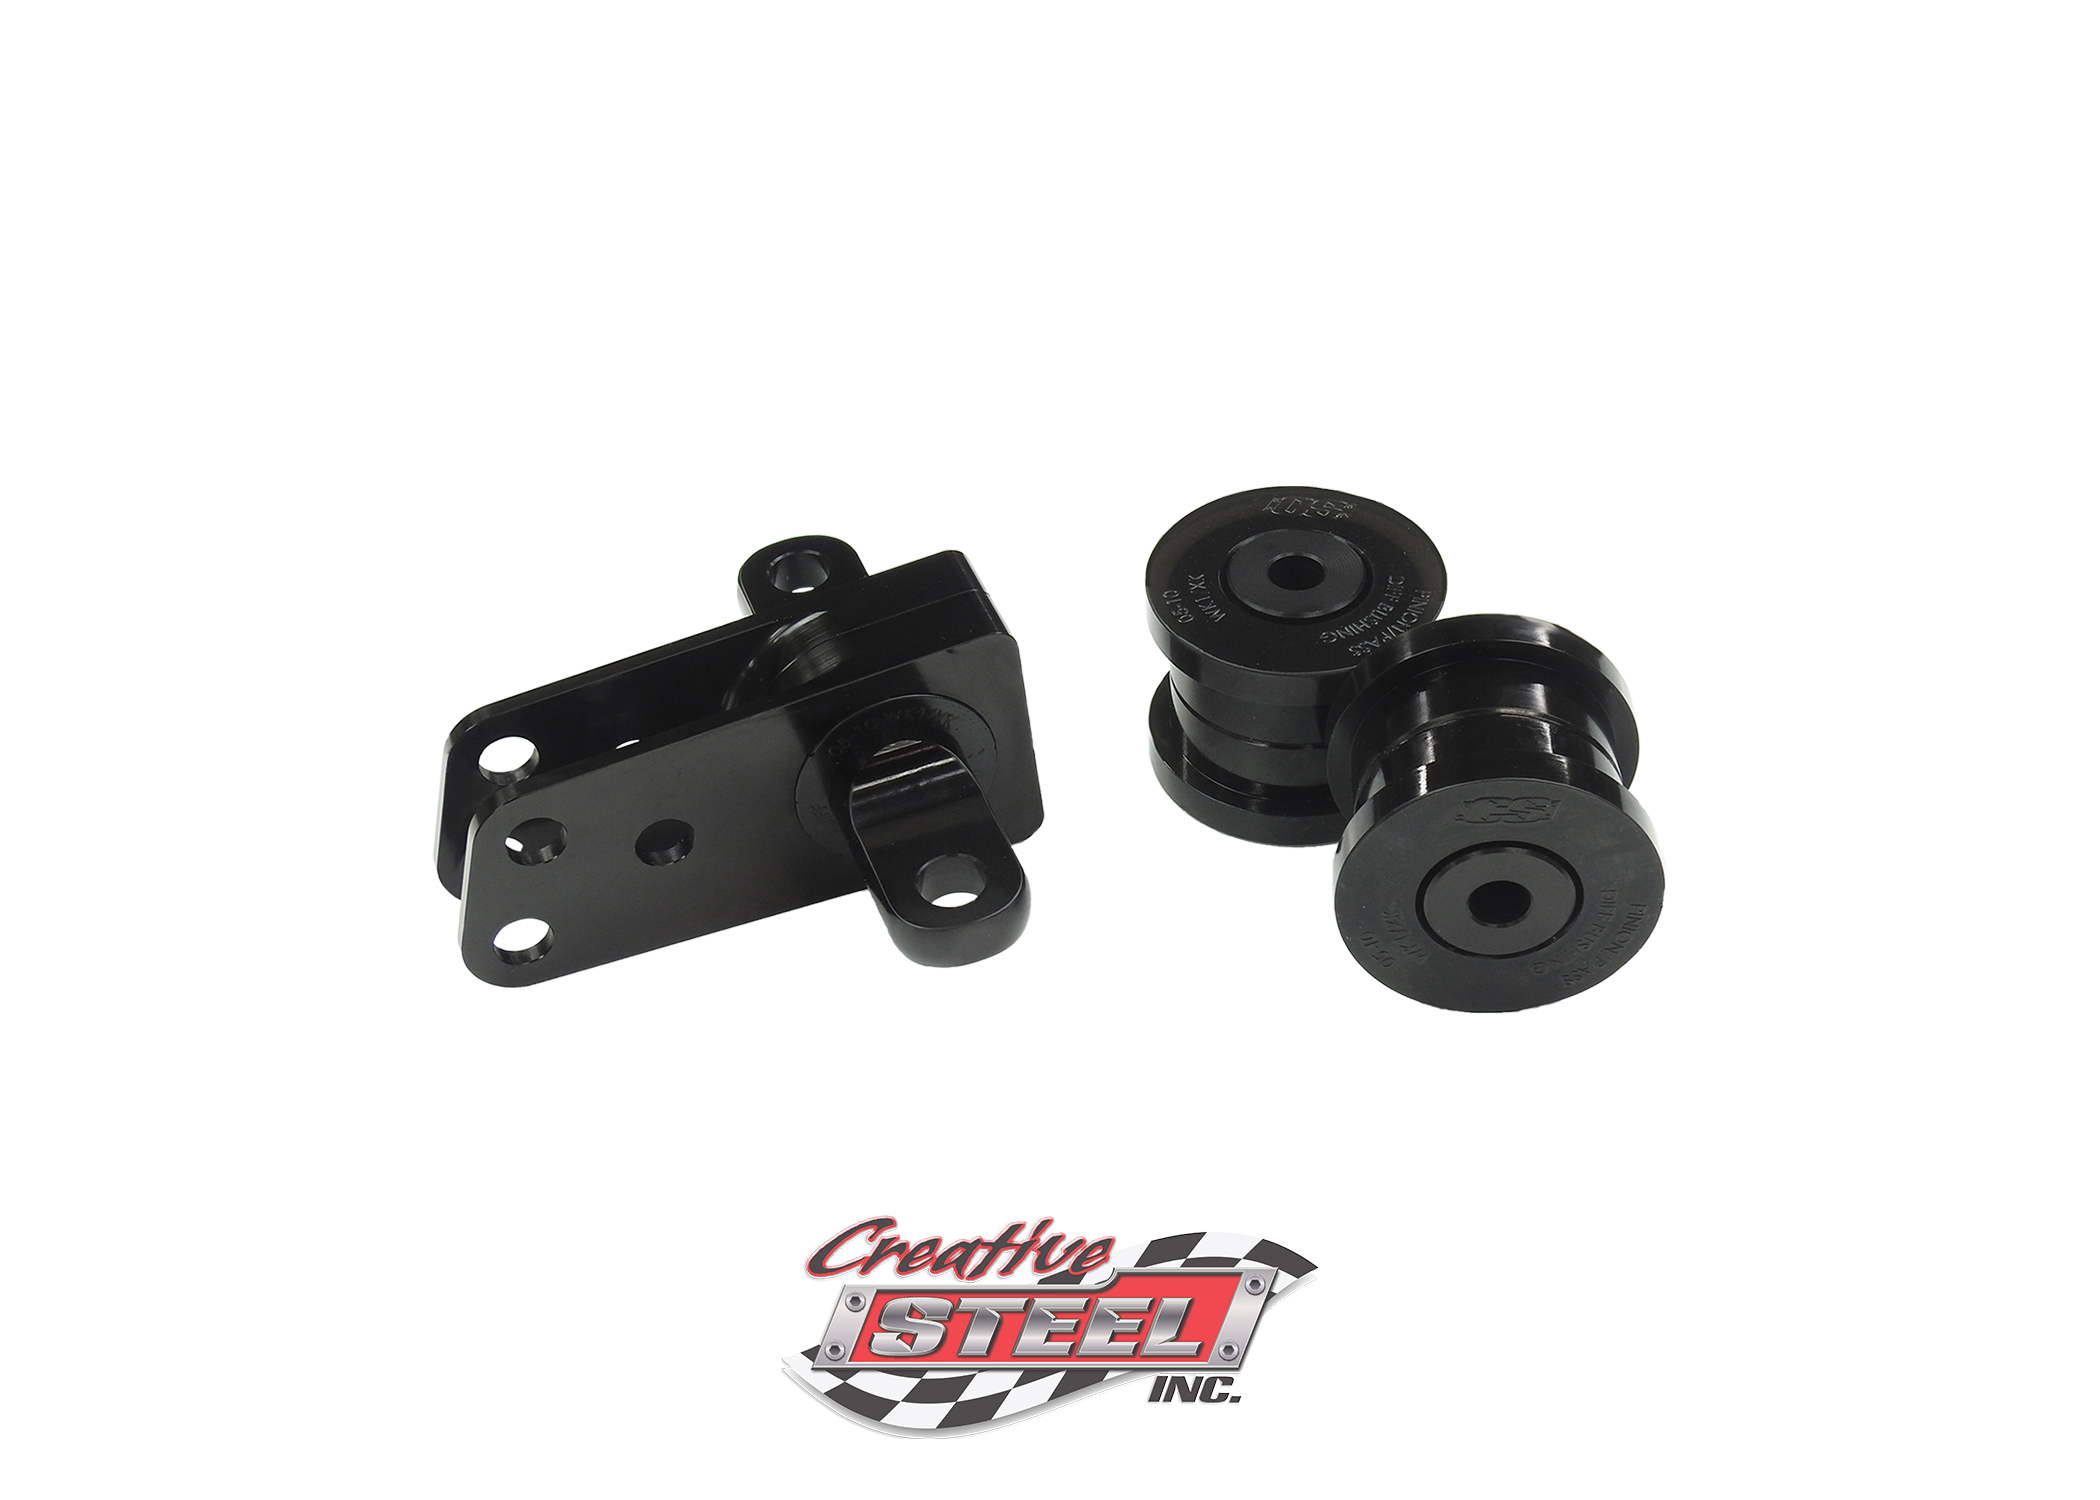 Front differential bushings for 05-10 Jeep Grand Cherokee SRT8